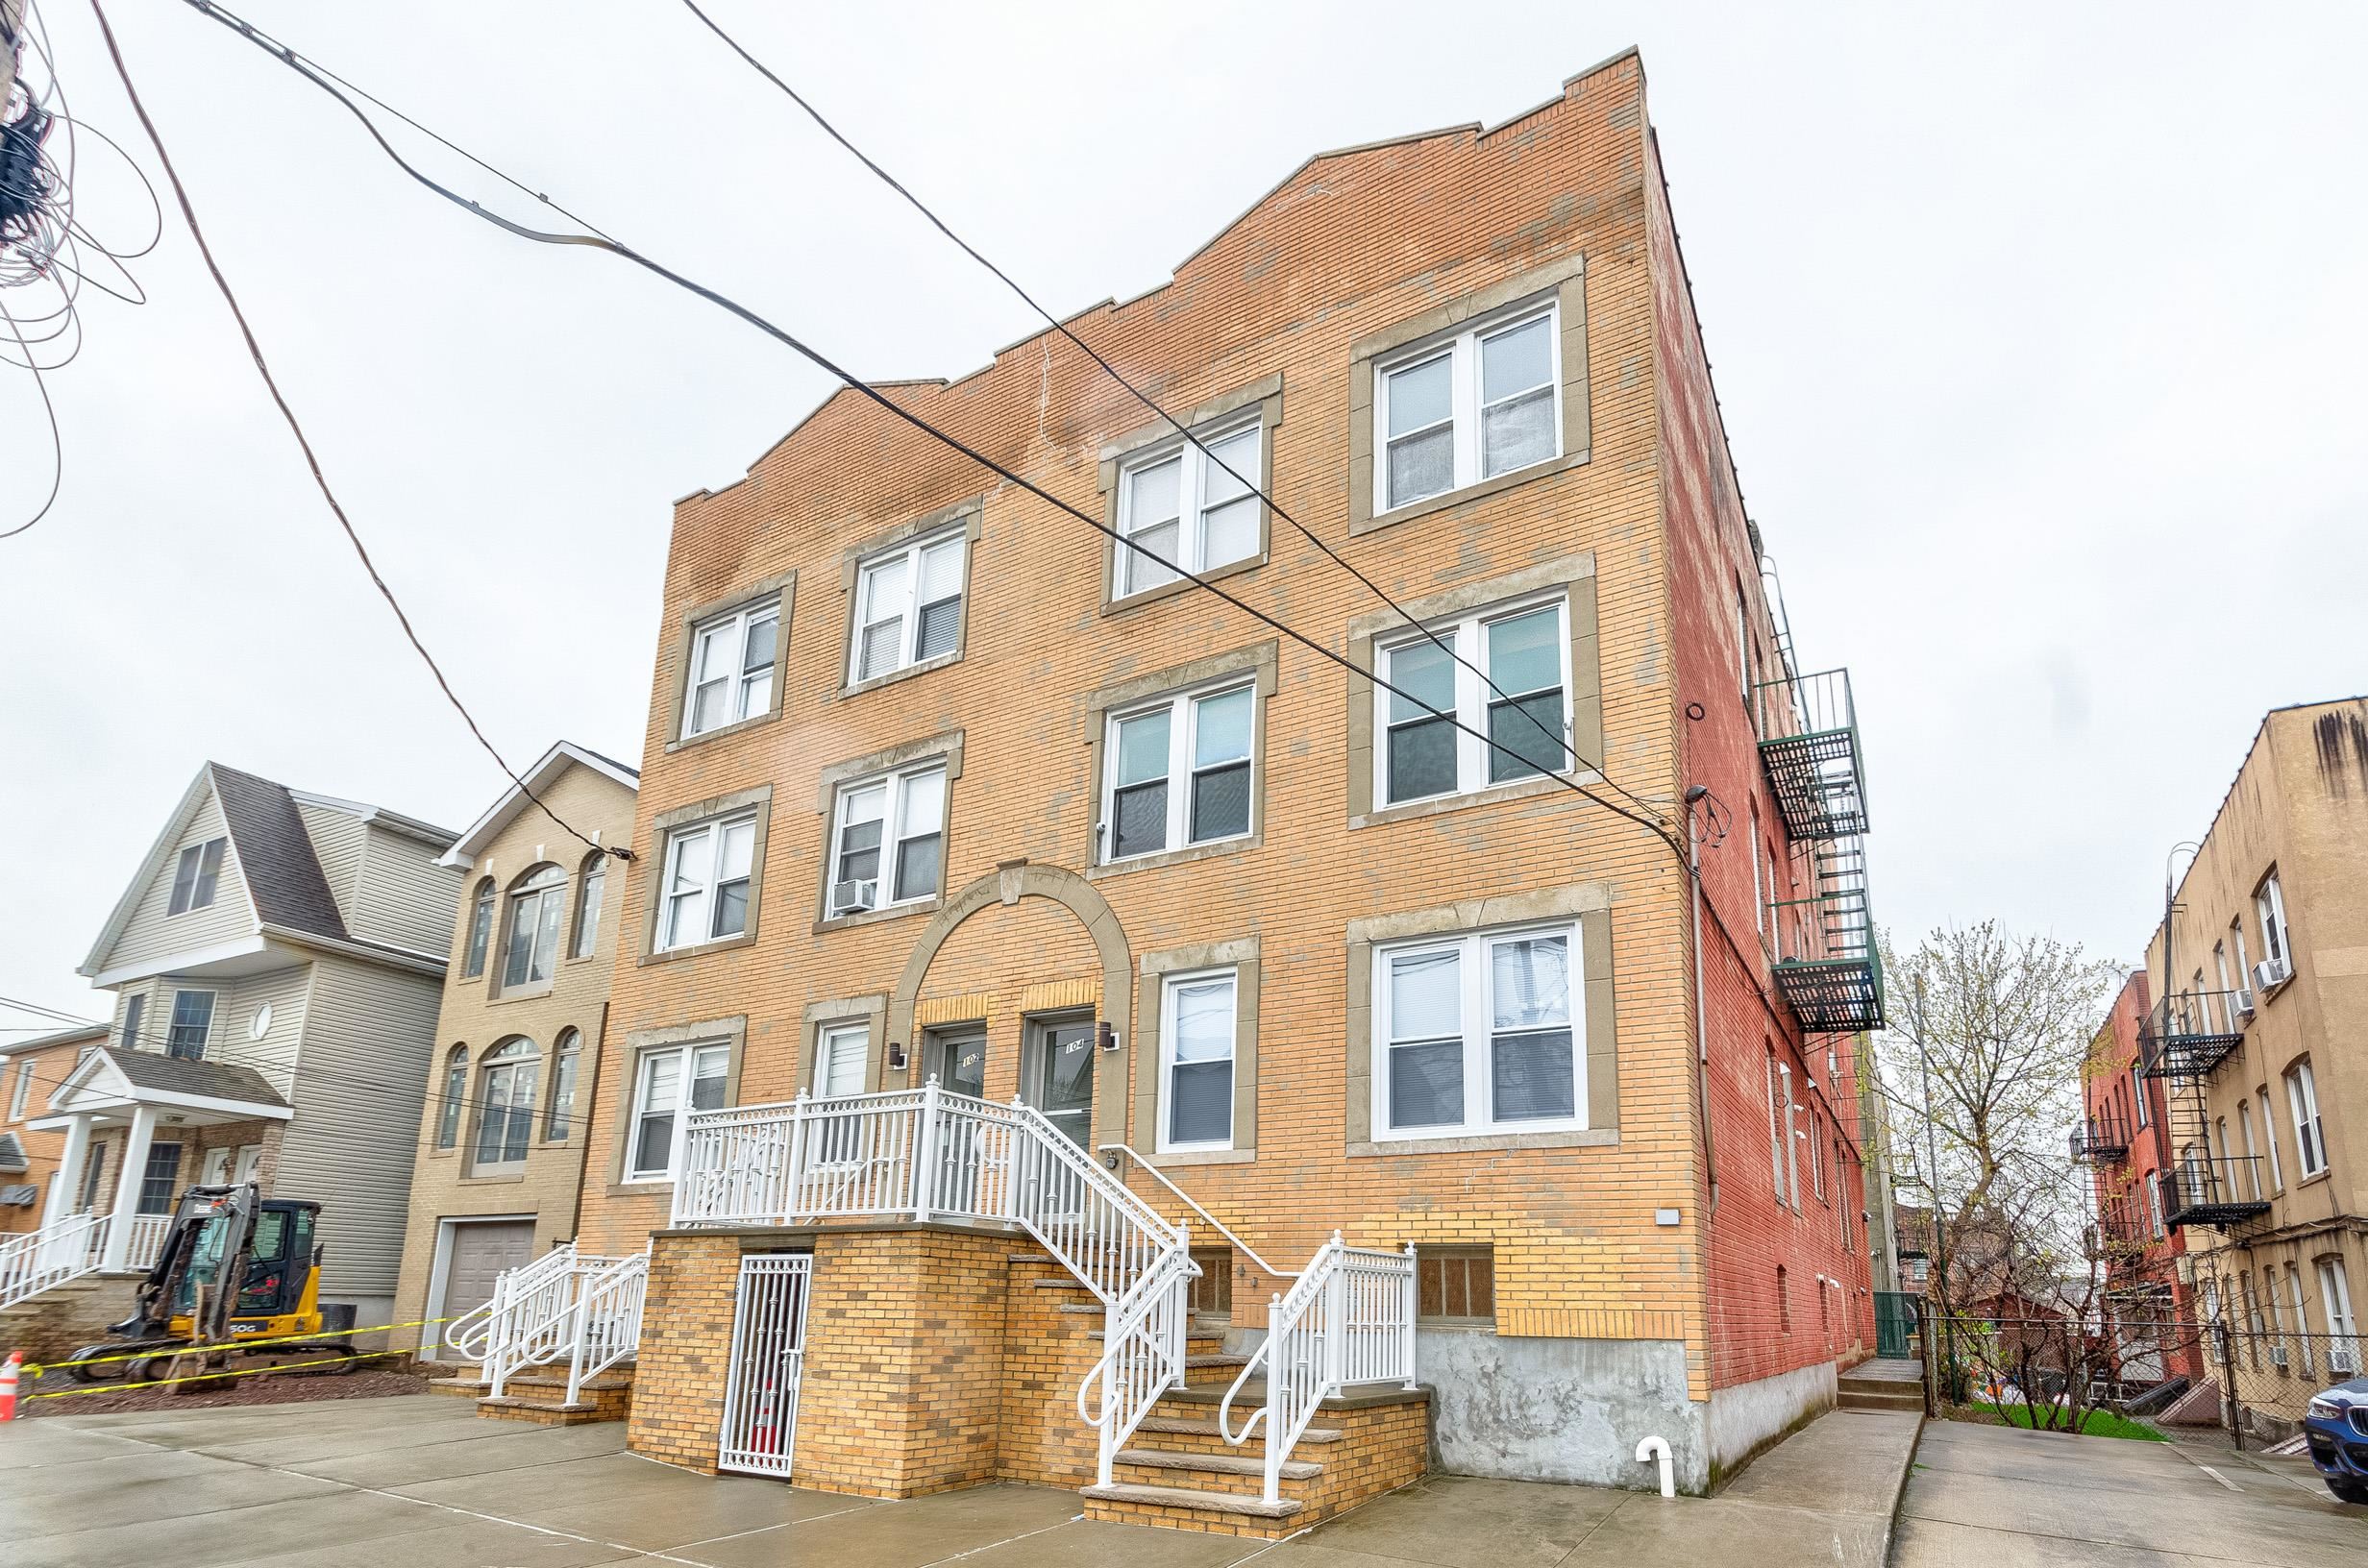 # 240006511 - For Rent in Bayonne NJ